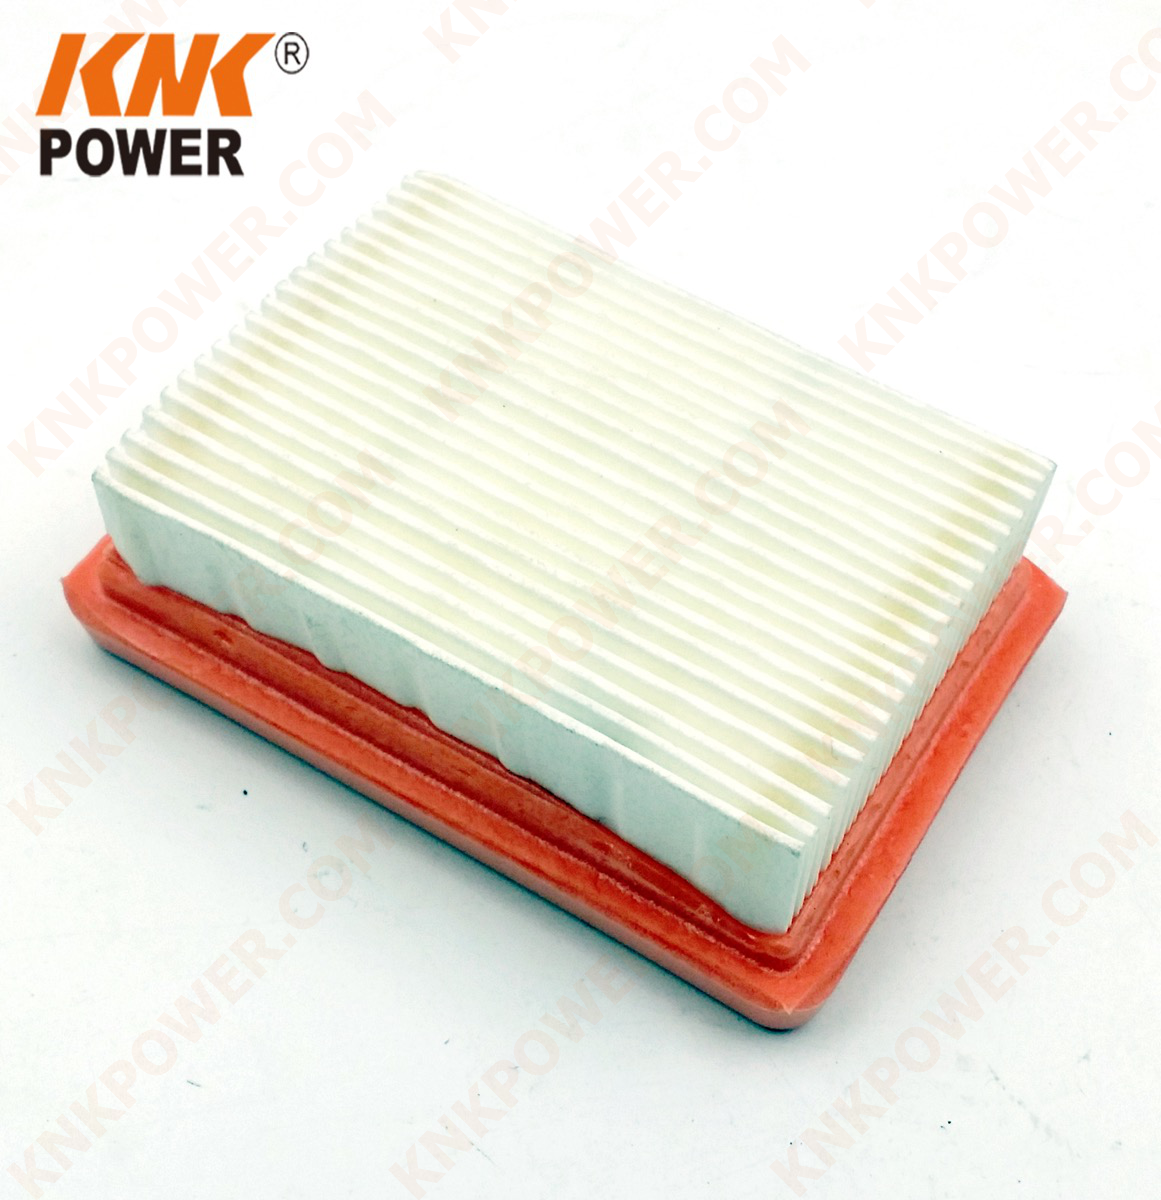 knkpower product image 19069 